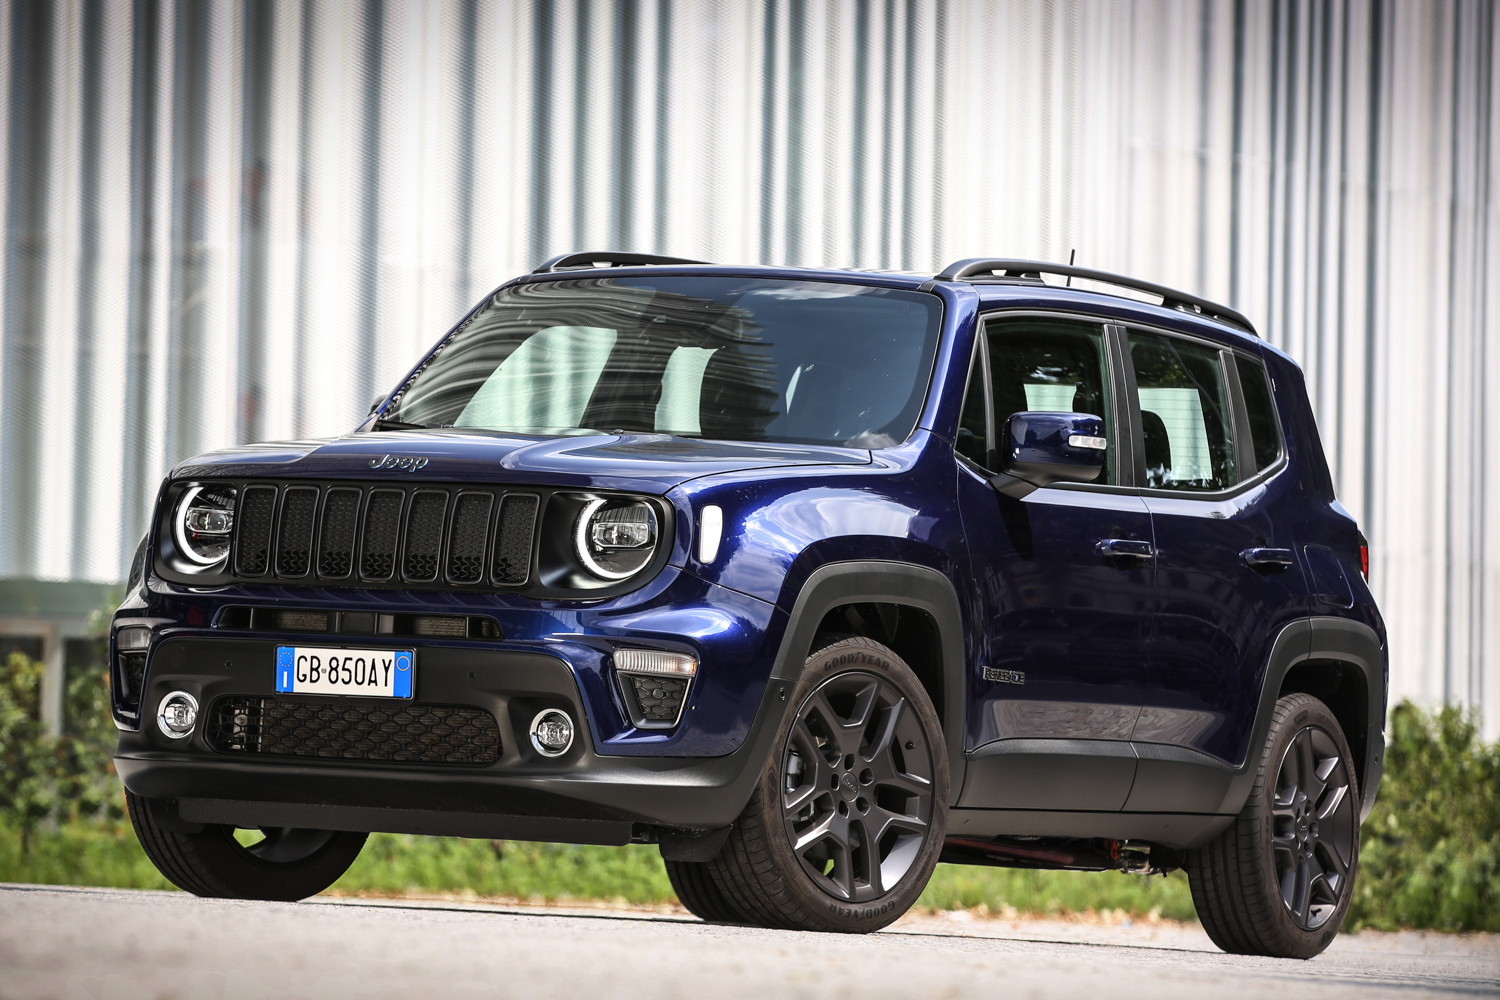 Renegade 4xe is the first plug-in hybrid Jeep